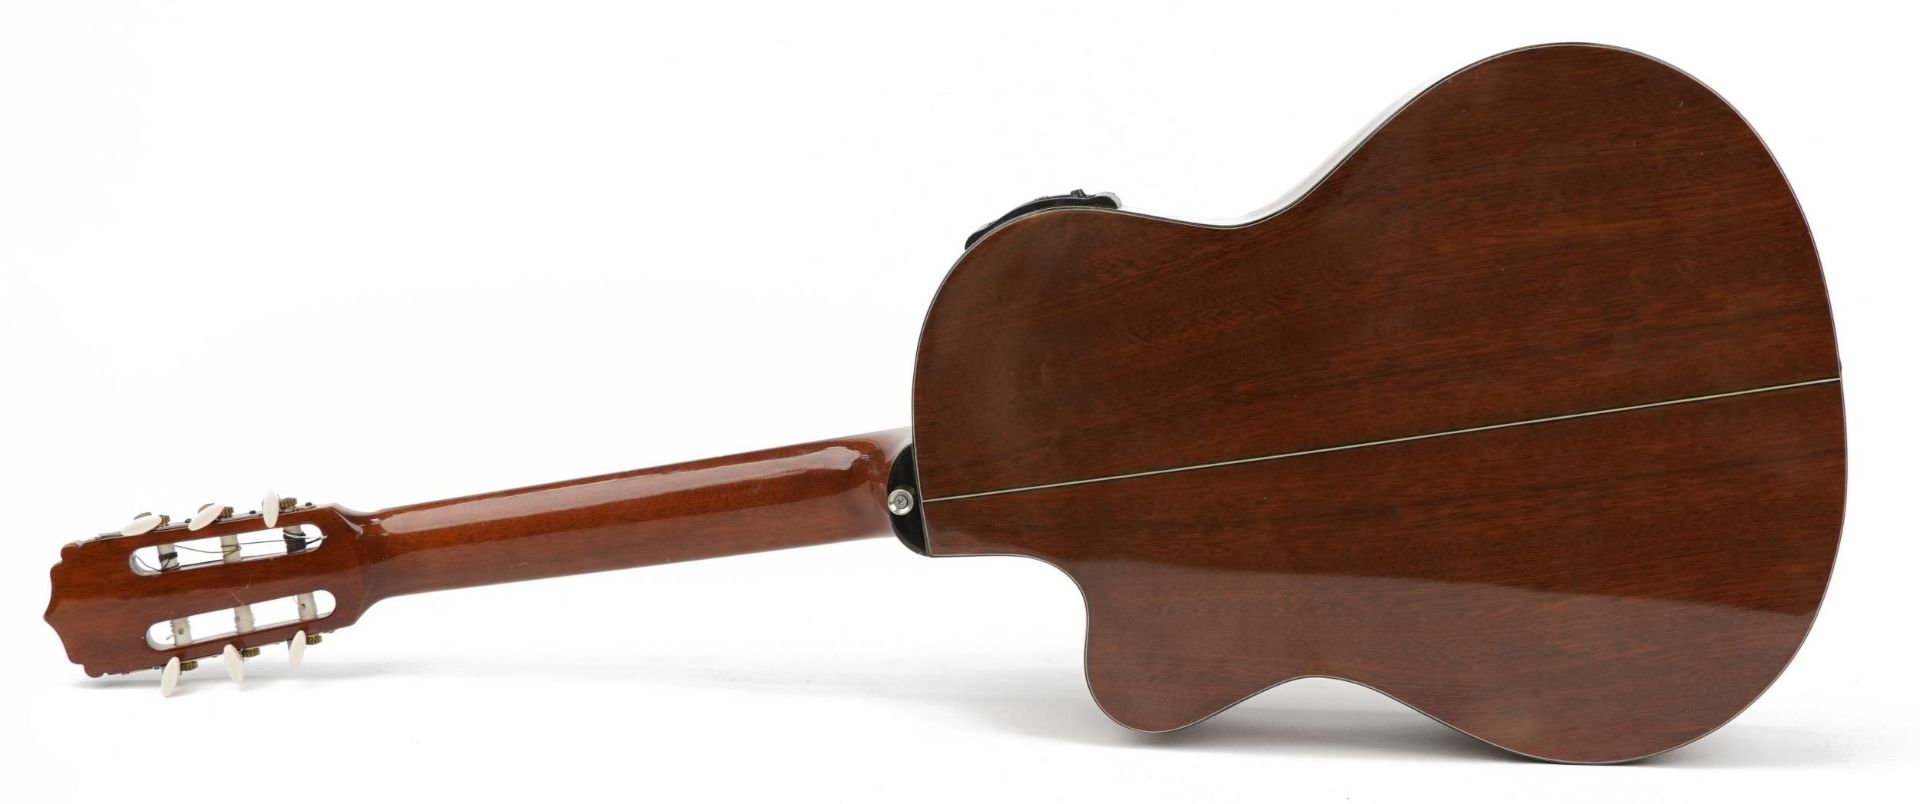 Aria wooden semi acoustic guitar, model number AL-30CE, 101cm in length : For further information on - Image 2 of 4